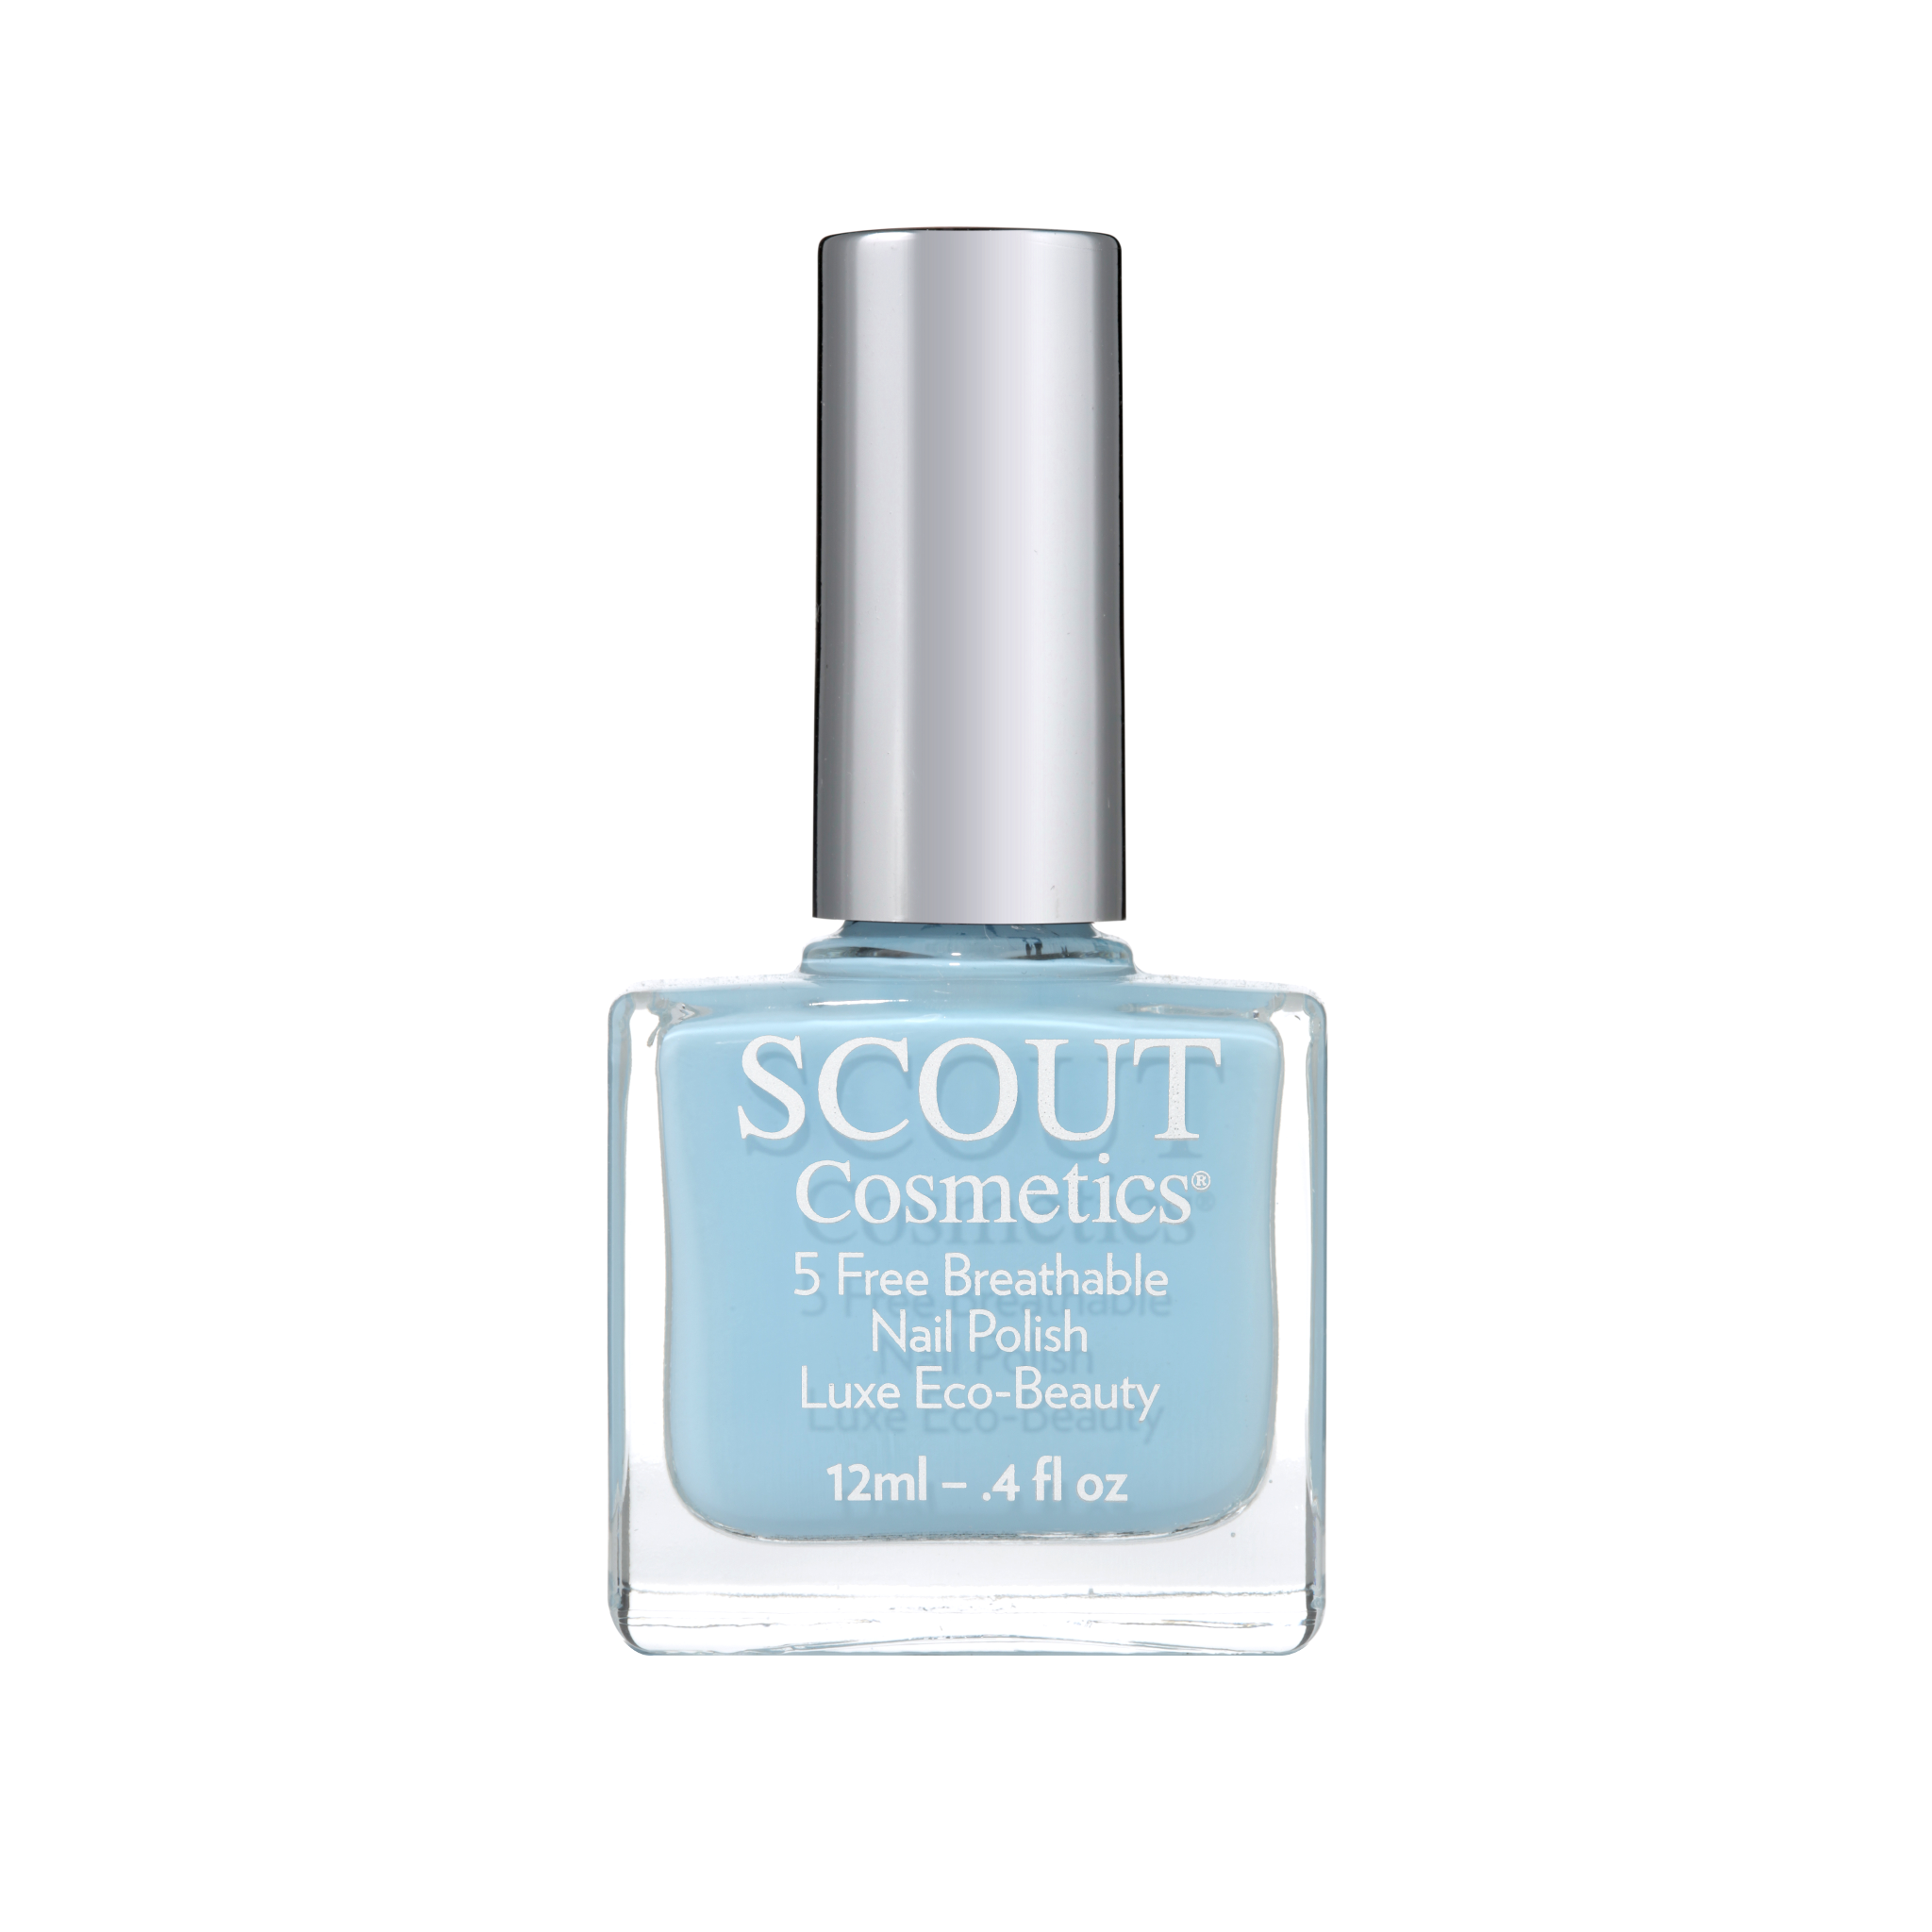 SCOUT Cosmetics Nail Polish - Dont You Forget About Me